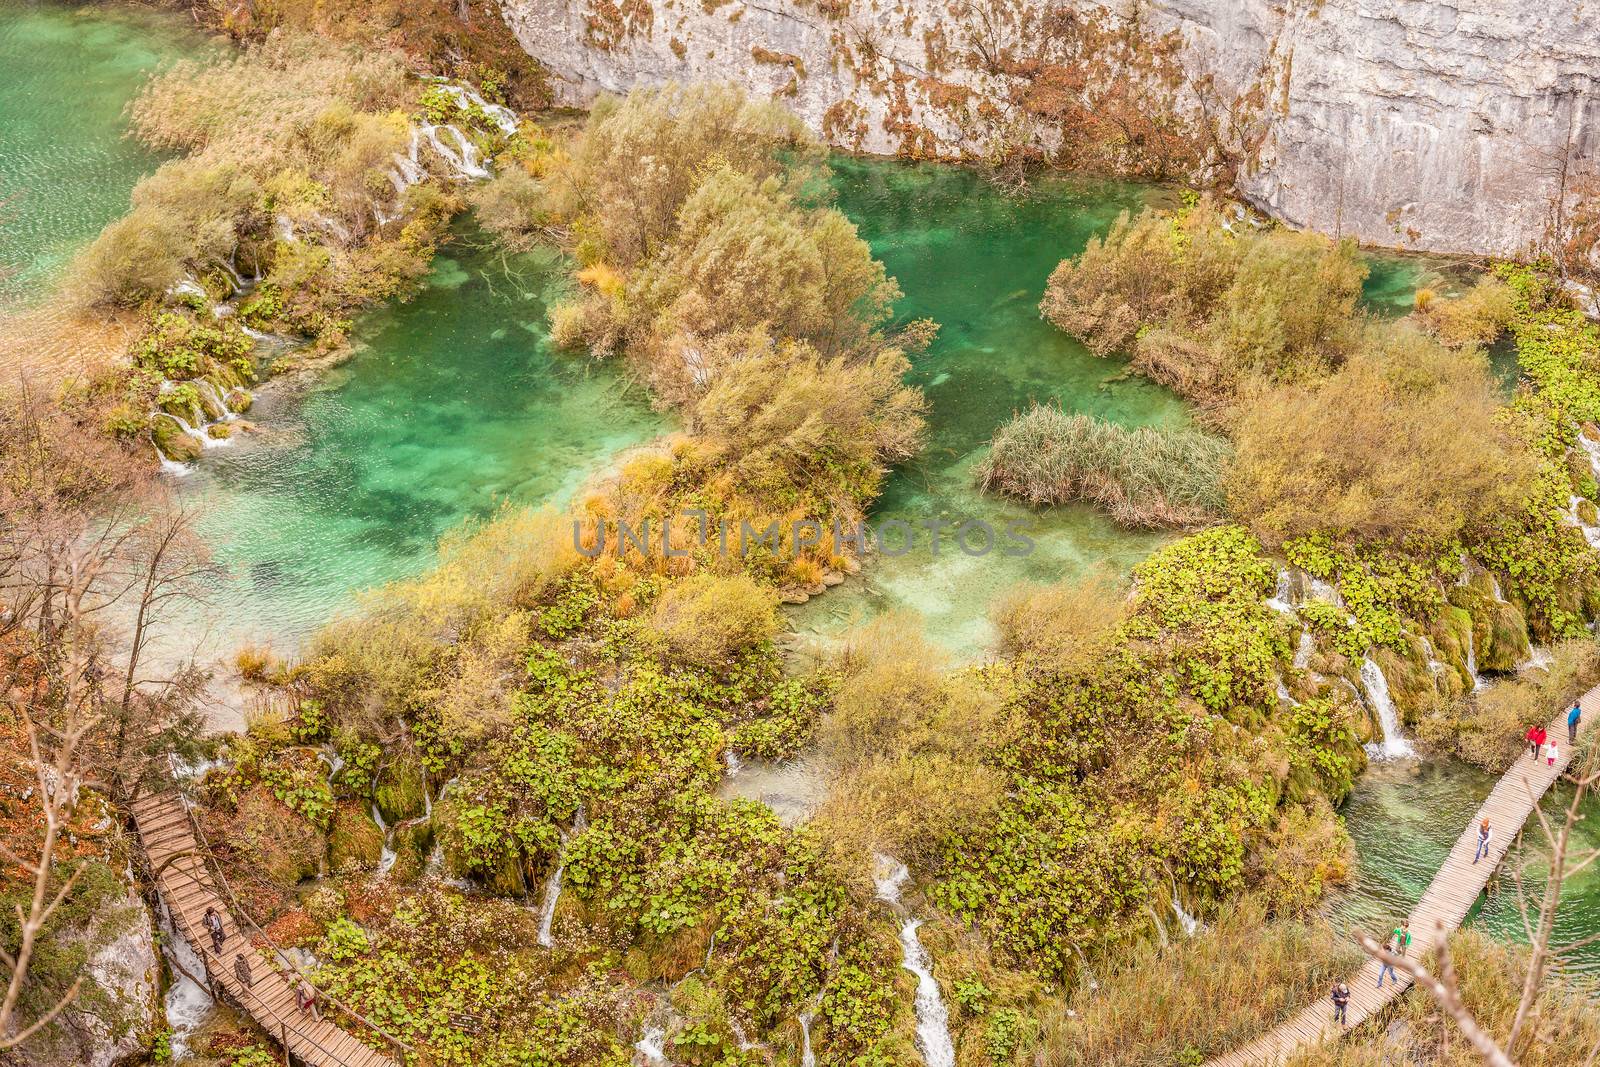 Top view of a portion of the Plitvice Lakes with its cascade